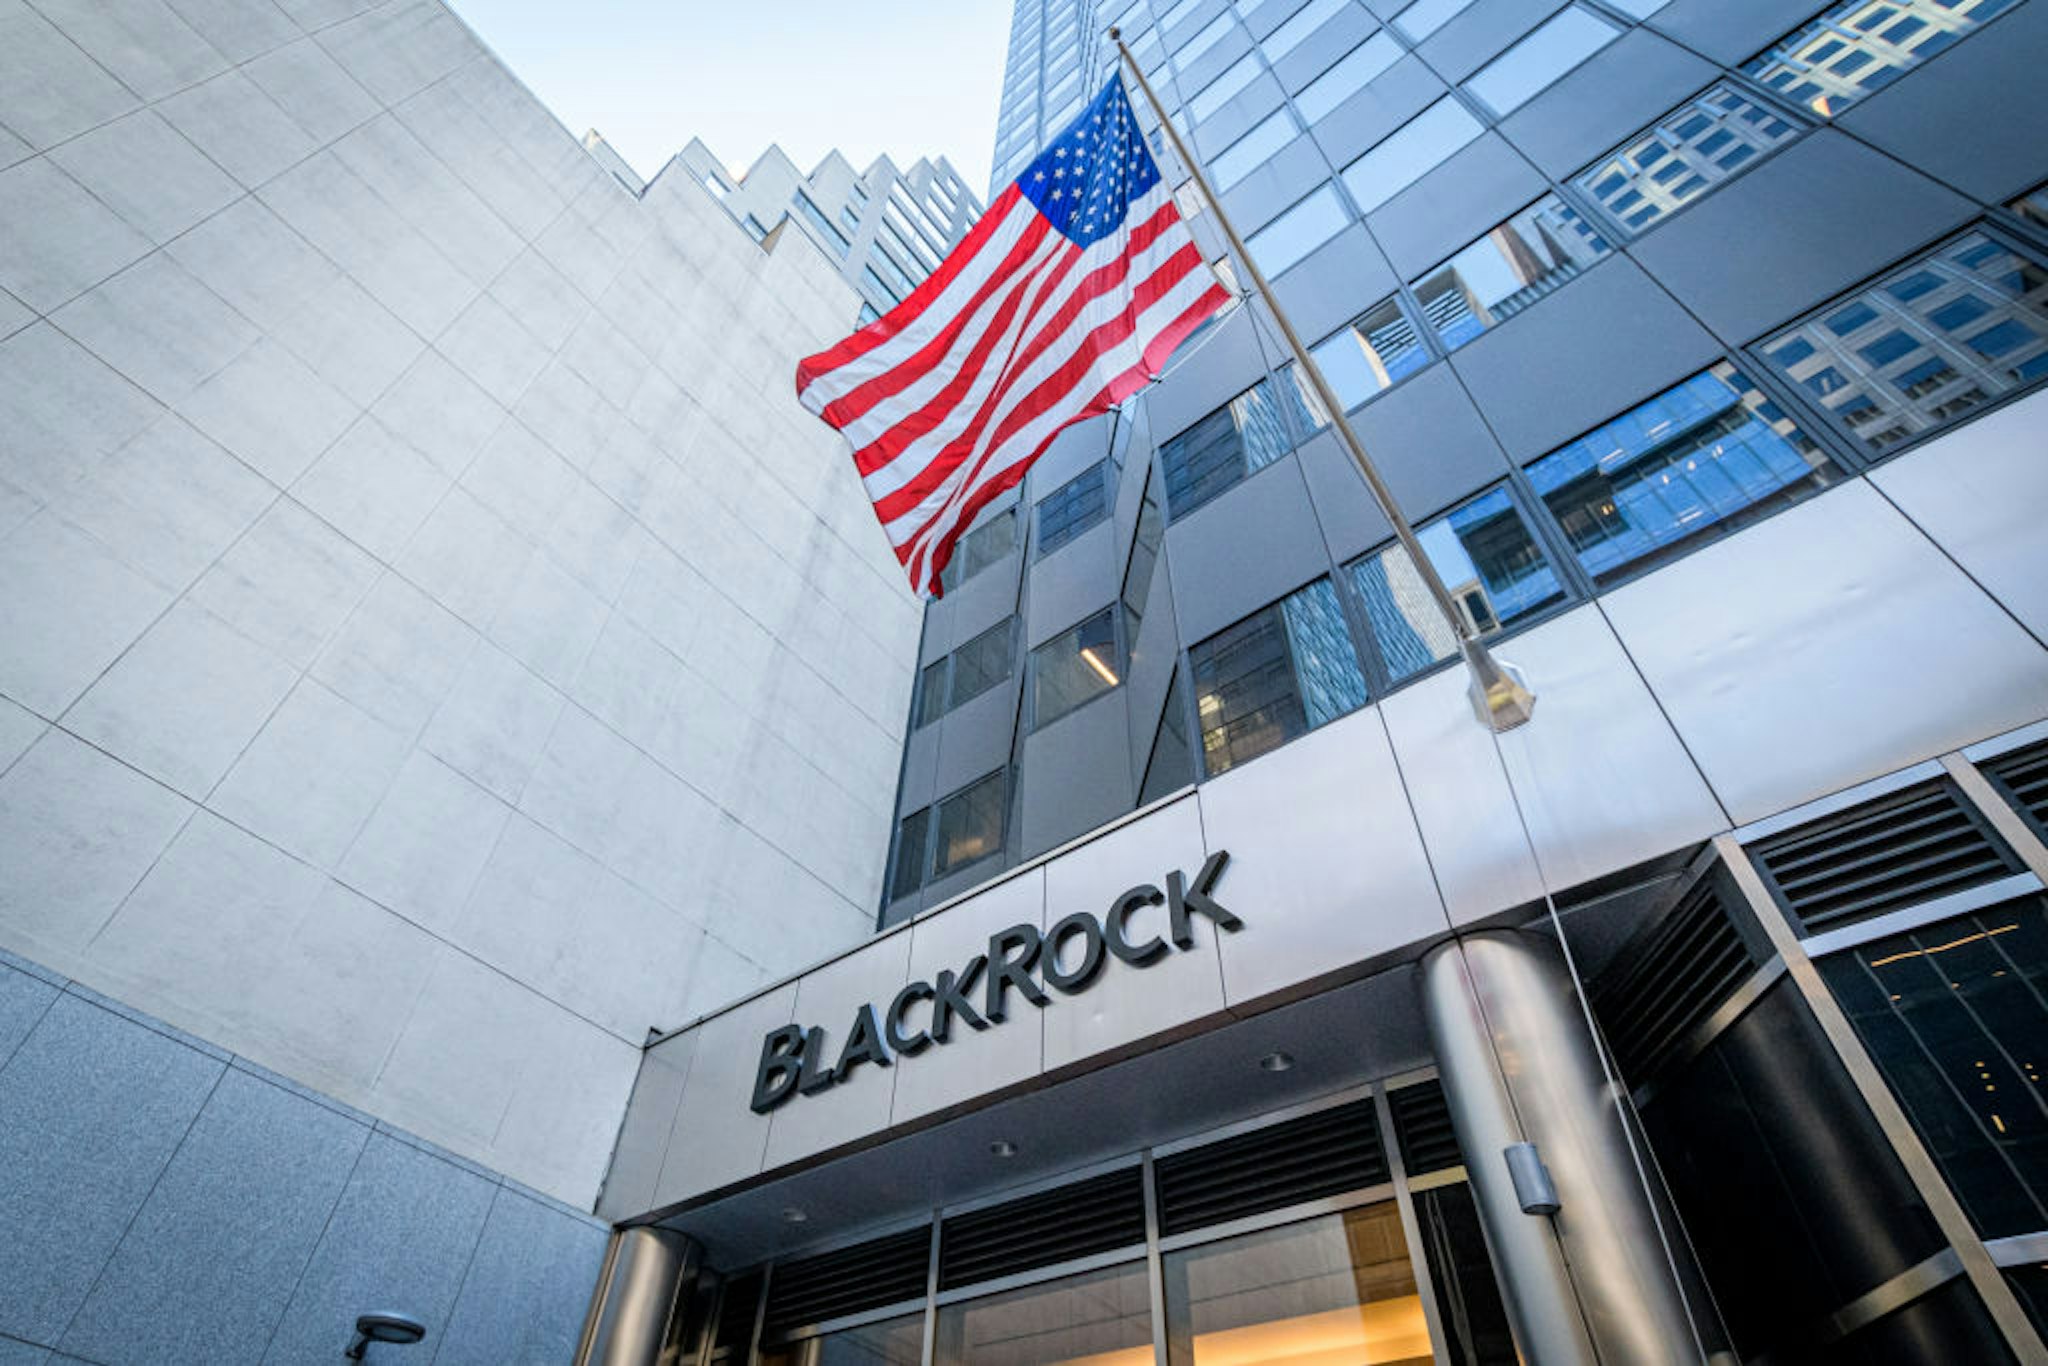 MANHATTAN, NEW YORK, UNITED STATES - 2021/10/18: BlackRock offices in New York City. Founded in 1988, BlackRock, Inc. is an US multinational investment management corporation. The corporation is the world's largest asset manager, with $8.67 trillion in assets under management as of January 2021.